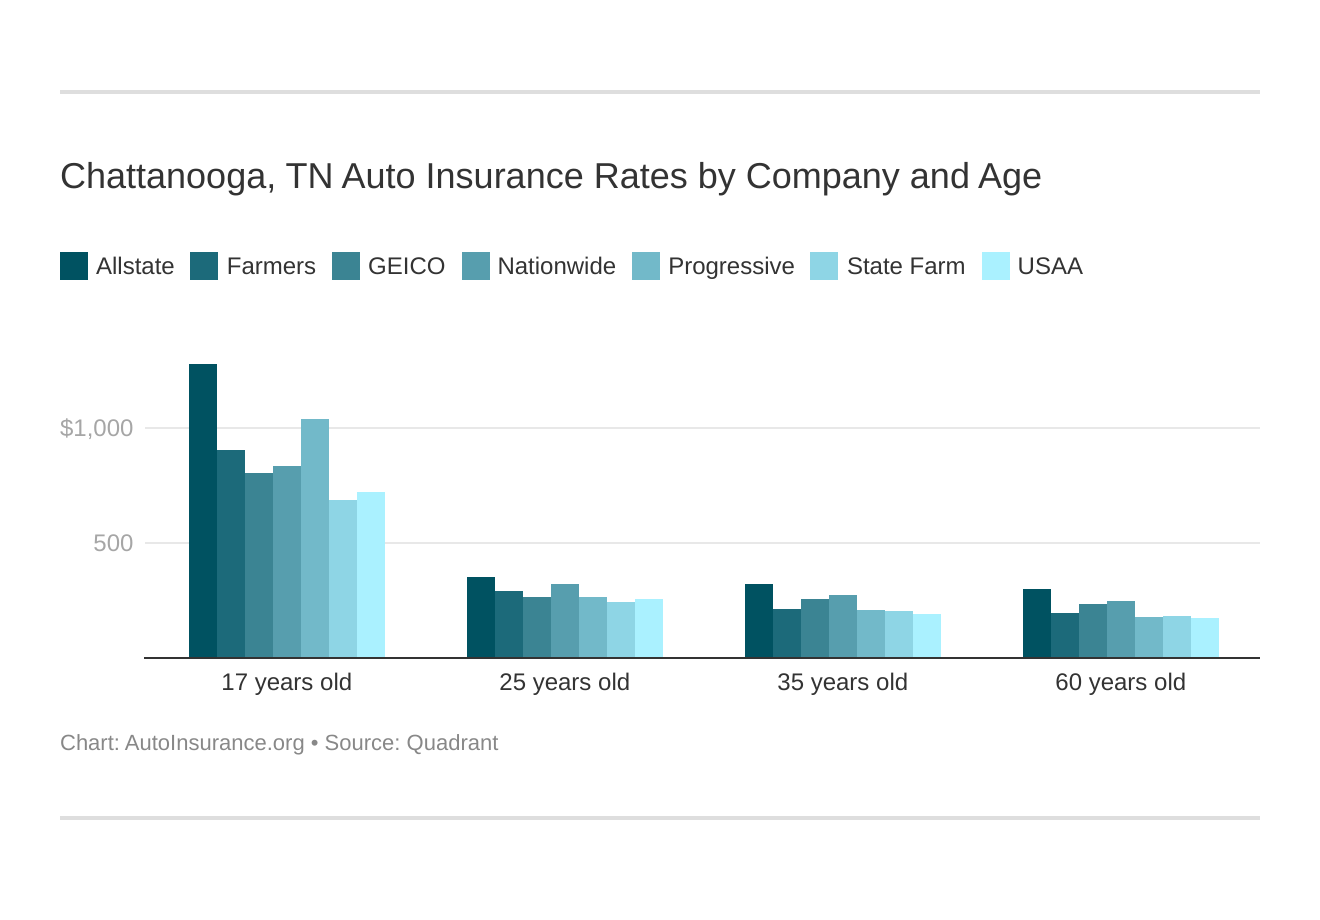 Chattanooga, TN Auto Insurance Rates by Company and Age